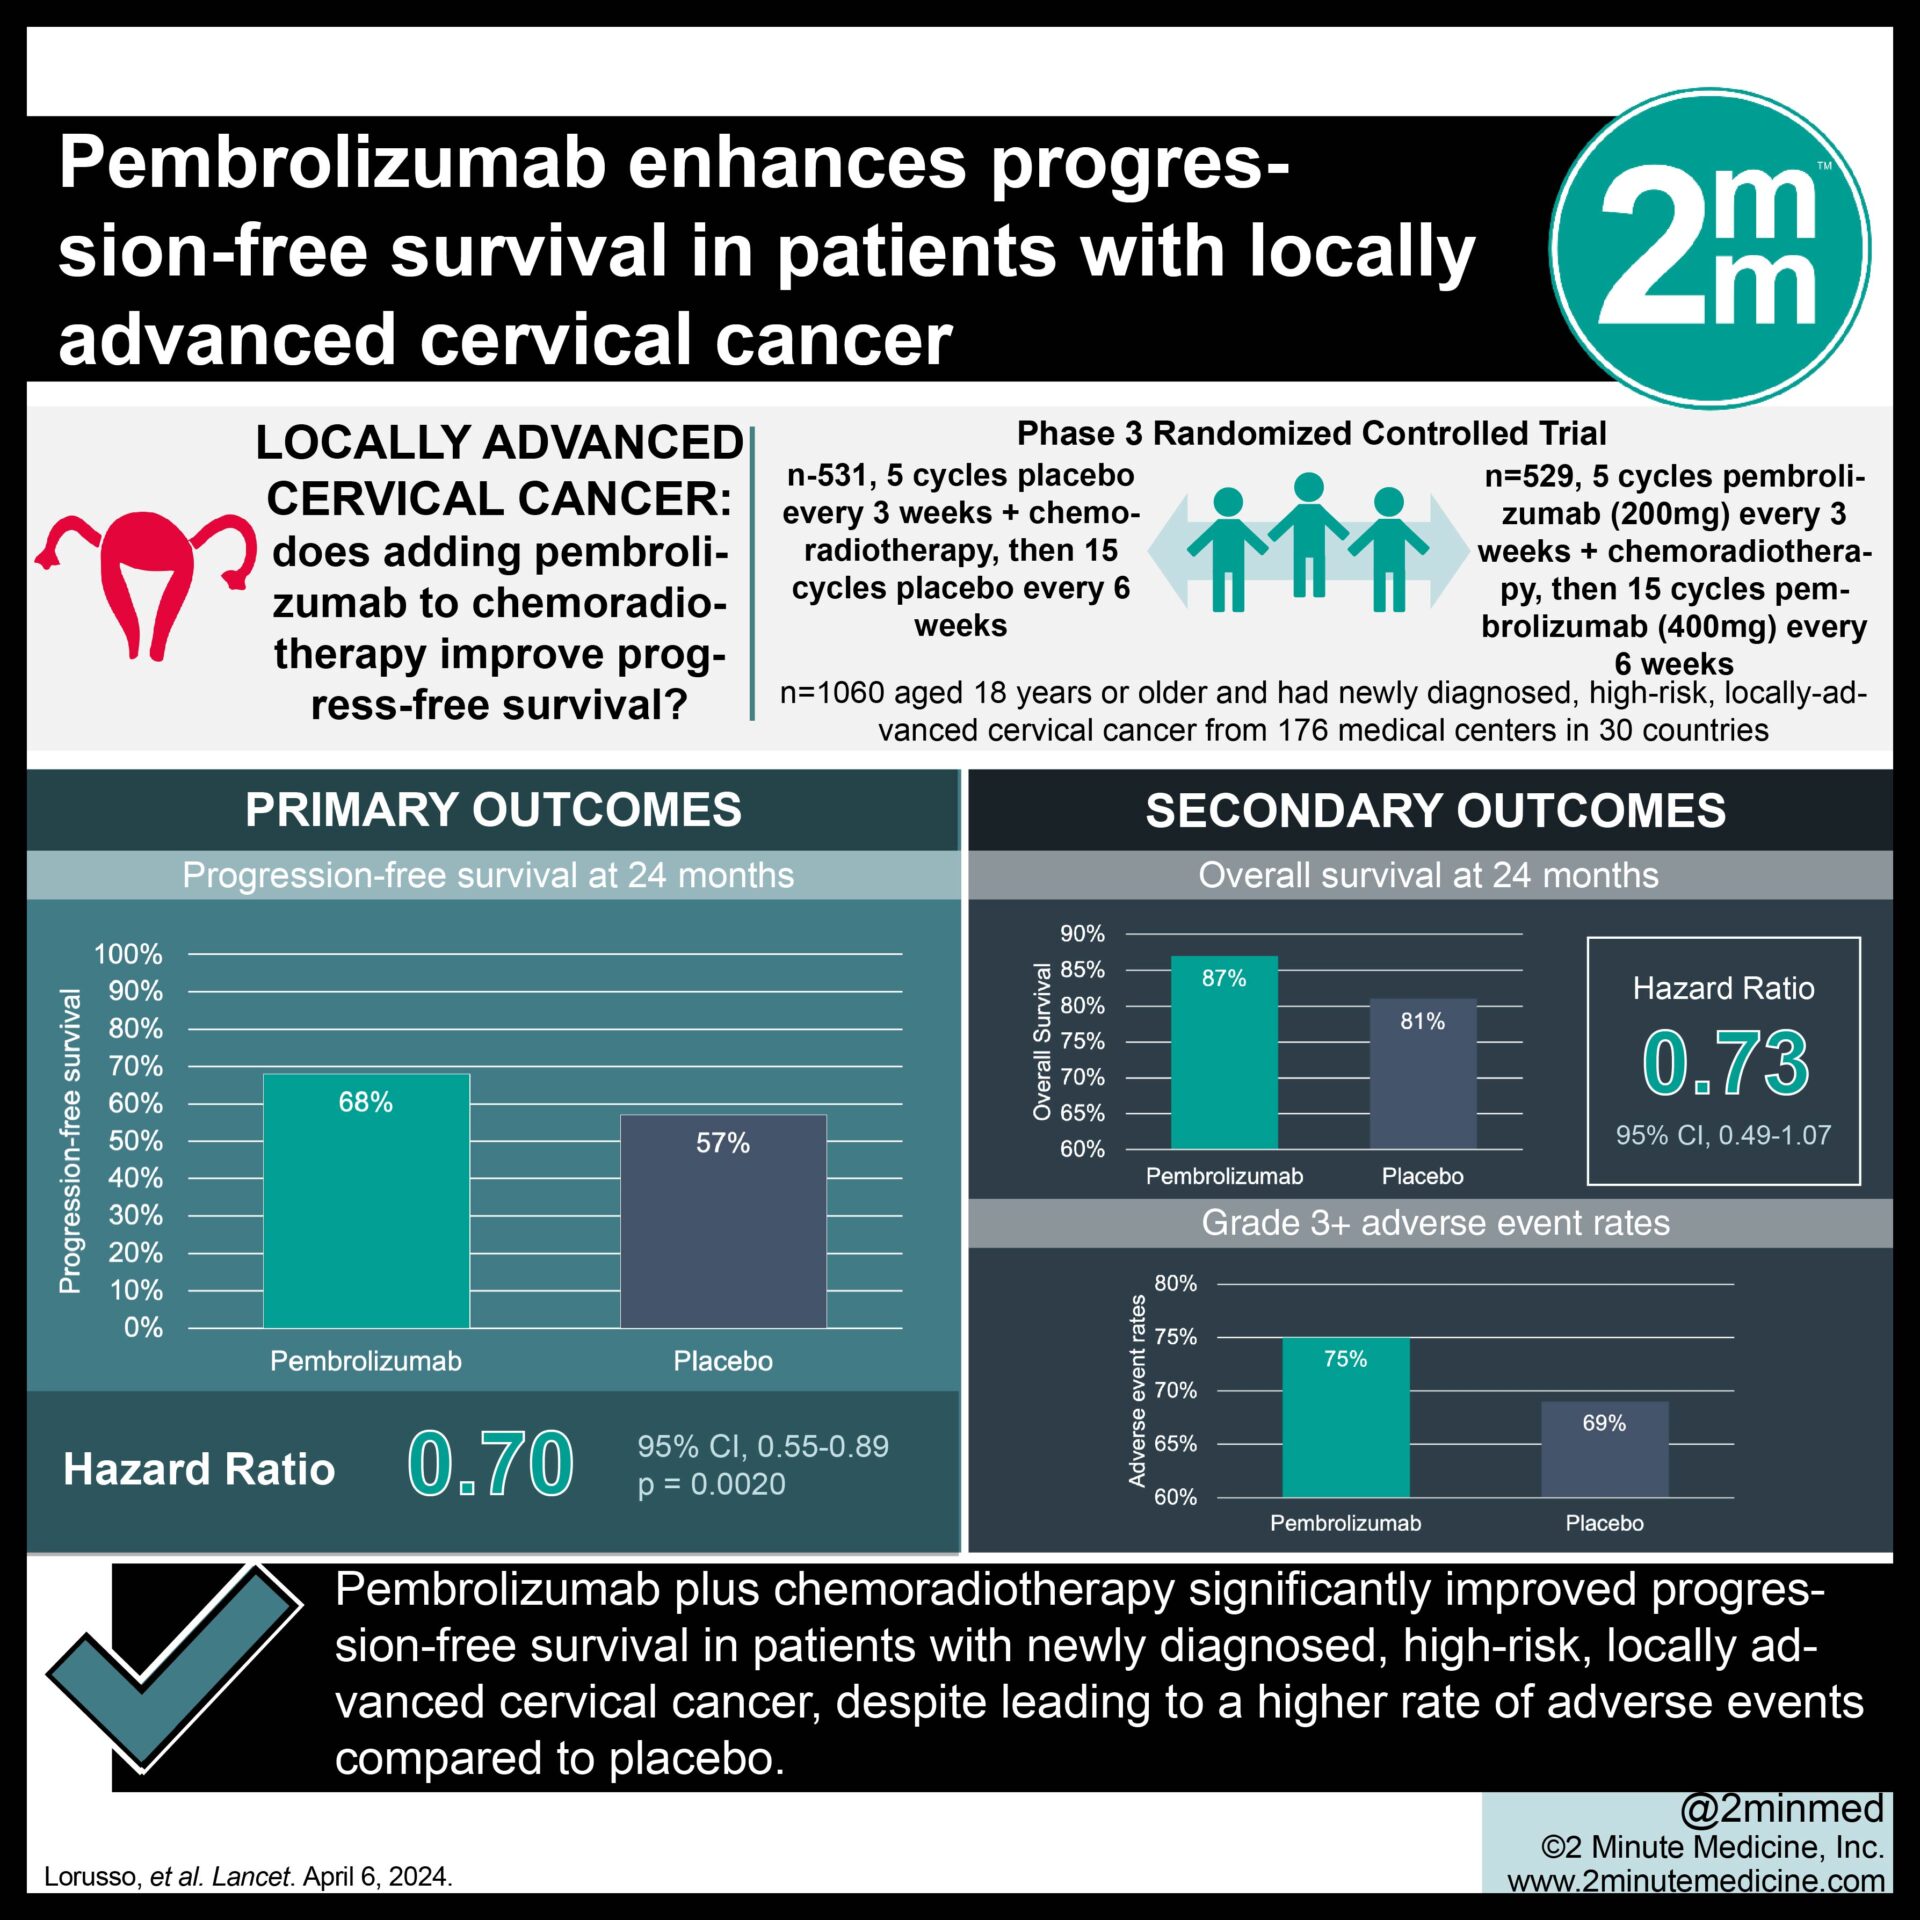 #VisualAbstract: Pembrolizumab enhances progression-free survival in patients with locally advanced cervical cancer